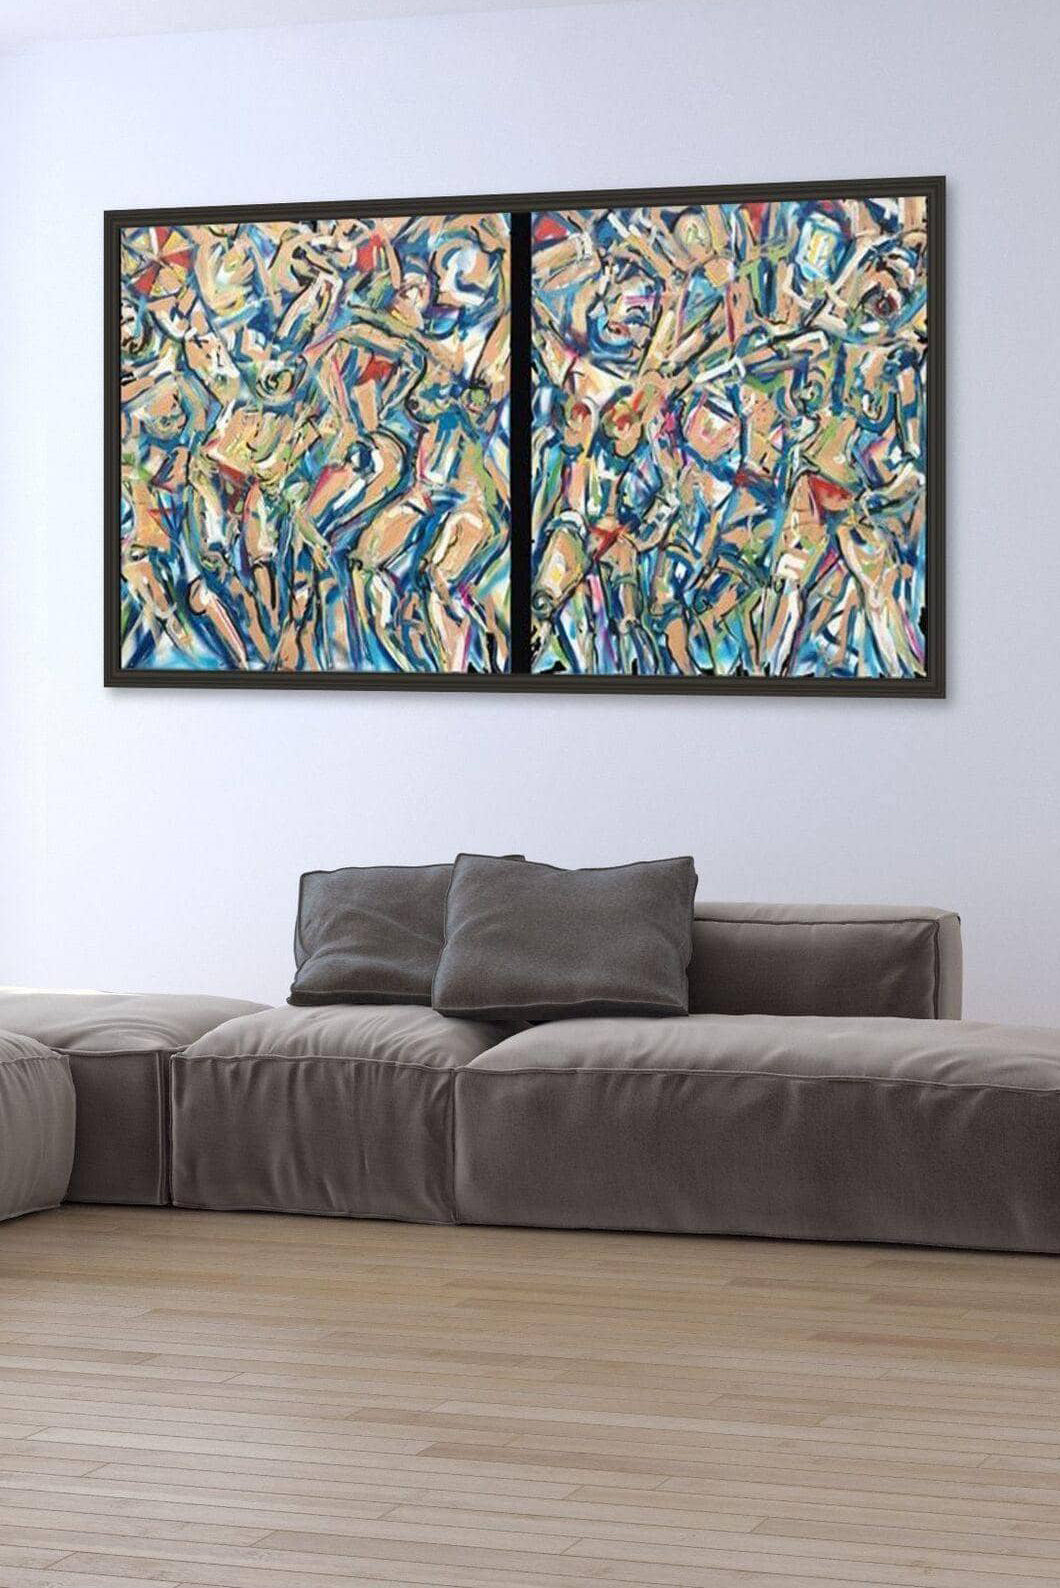 Figurative Painting adds emotion, life & movement to this simple modern living space